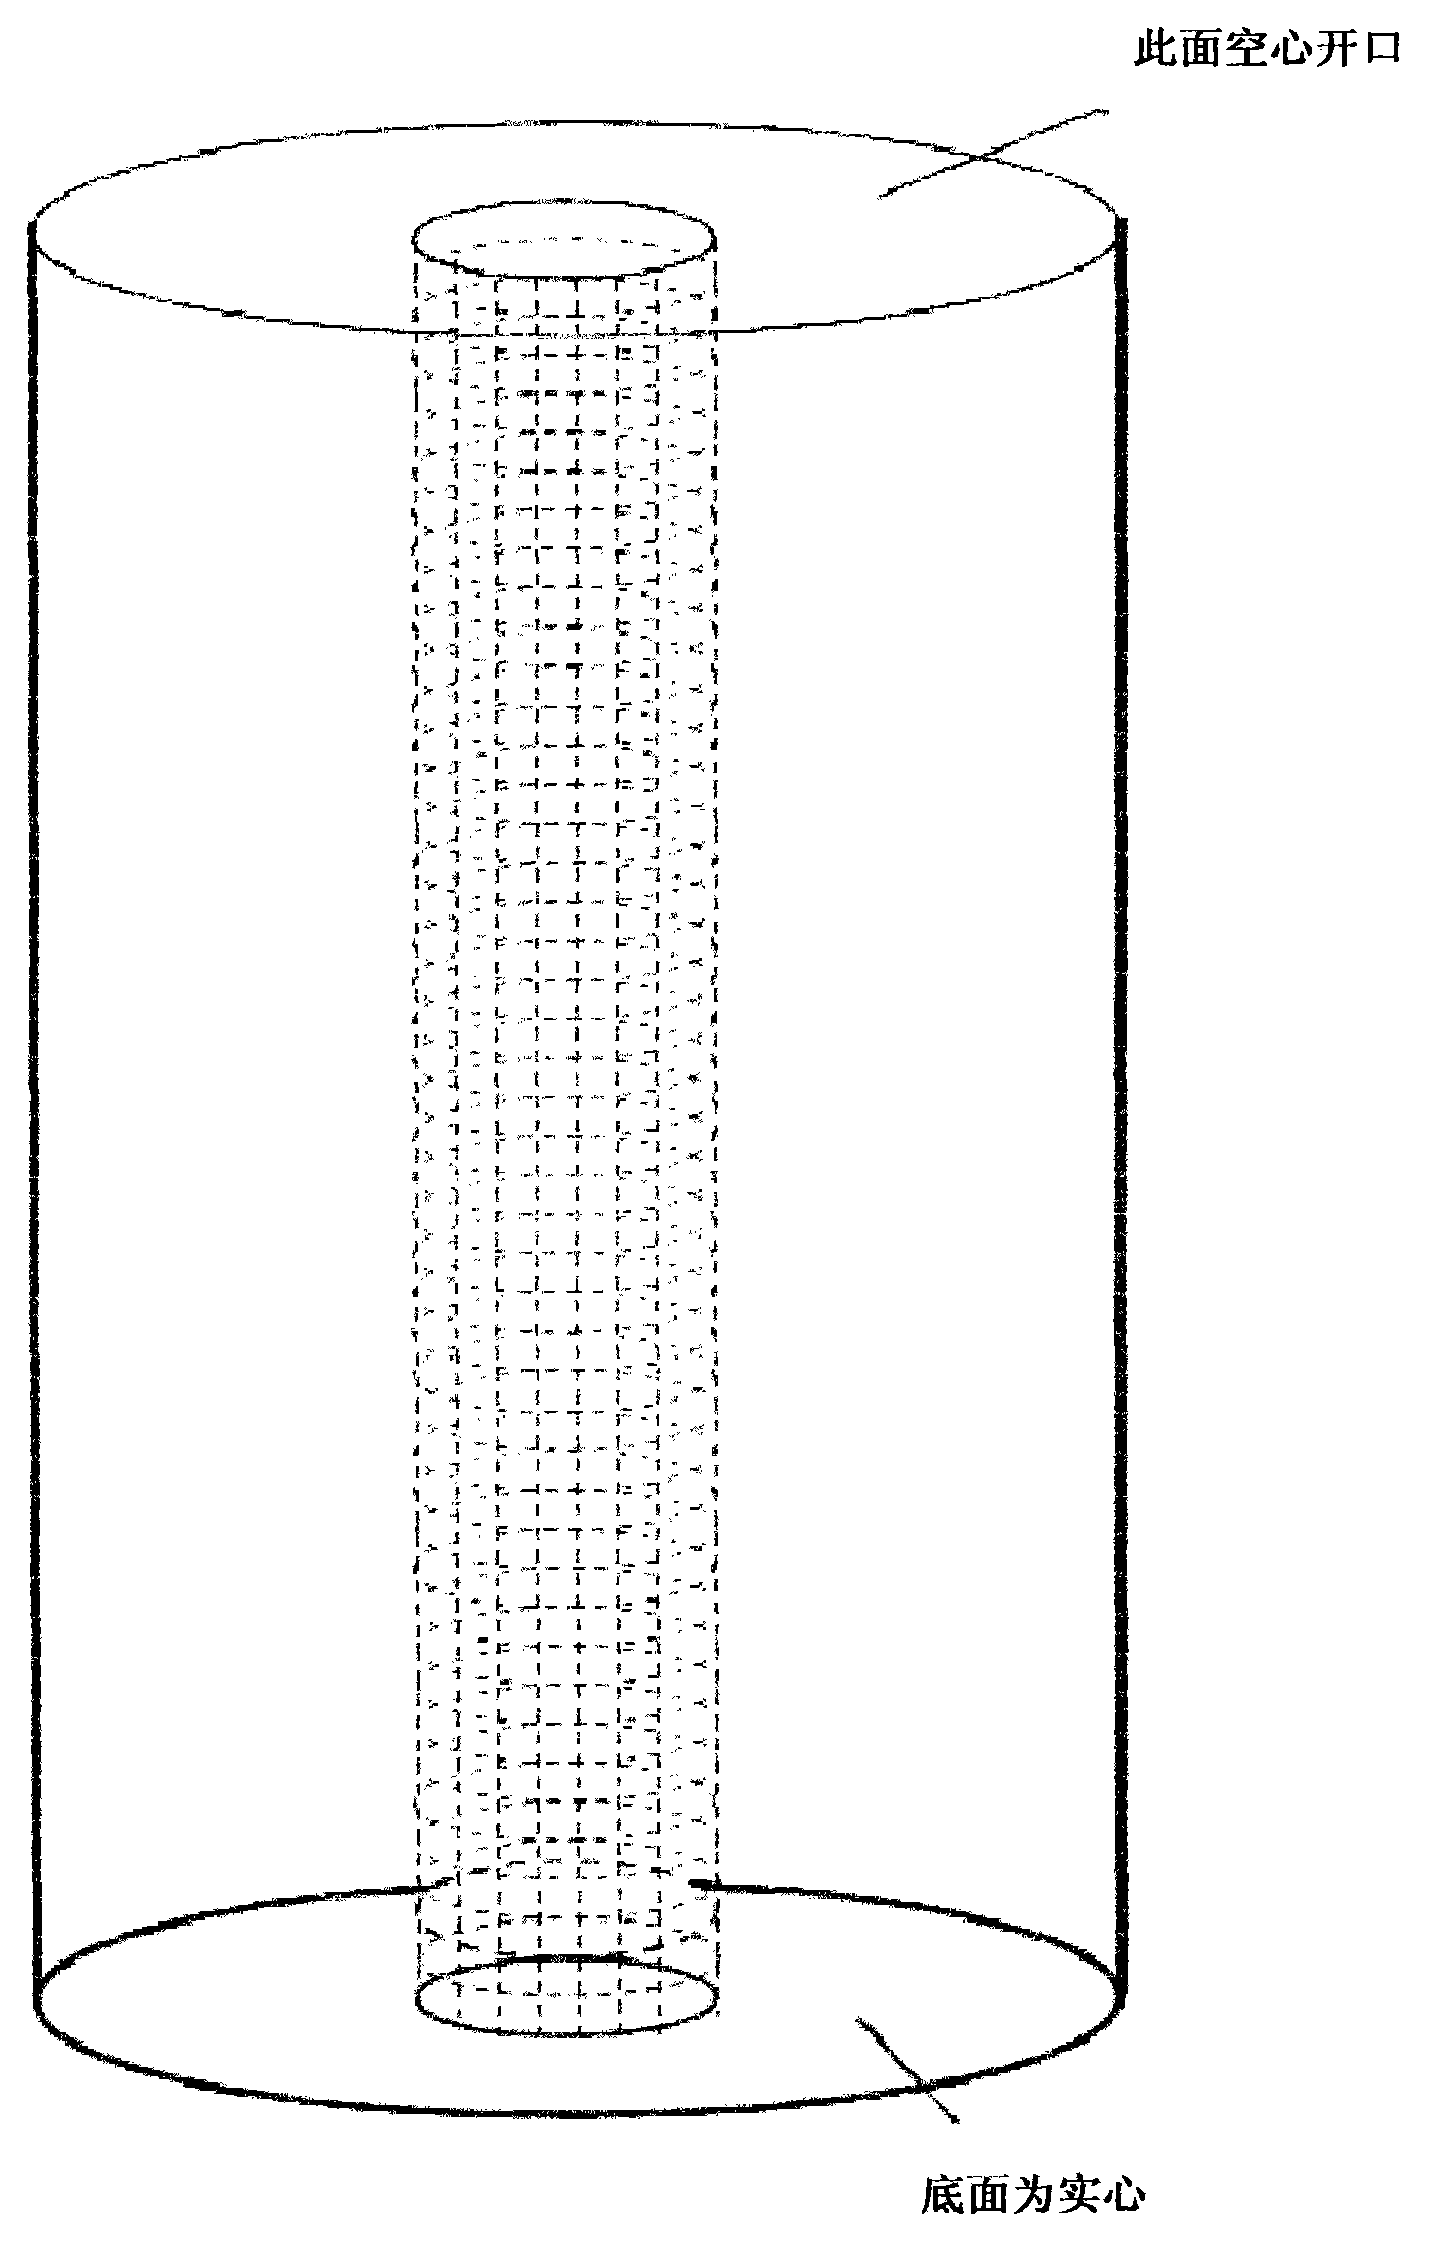 Preparation method of activated carbon filter